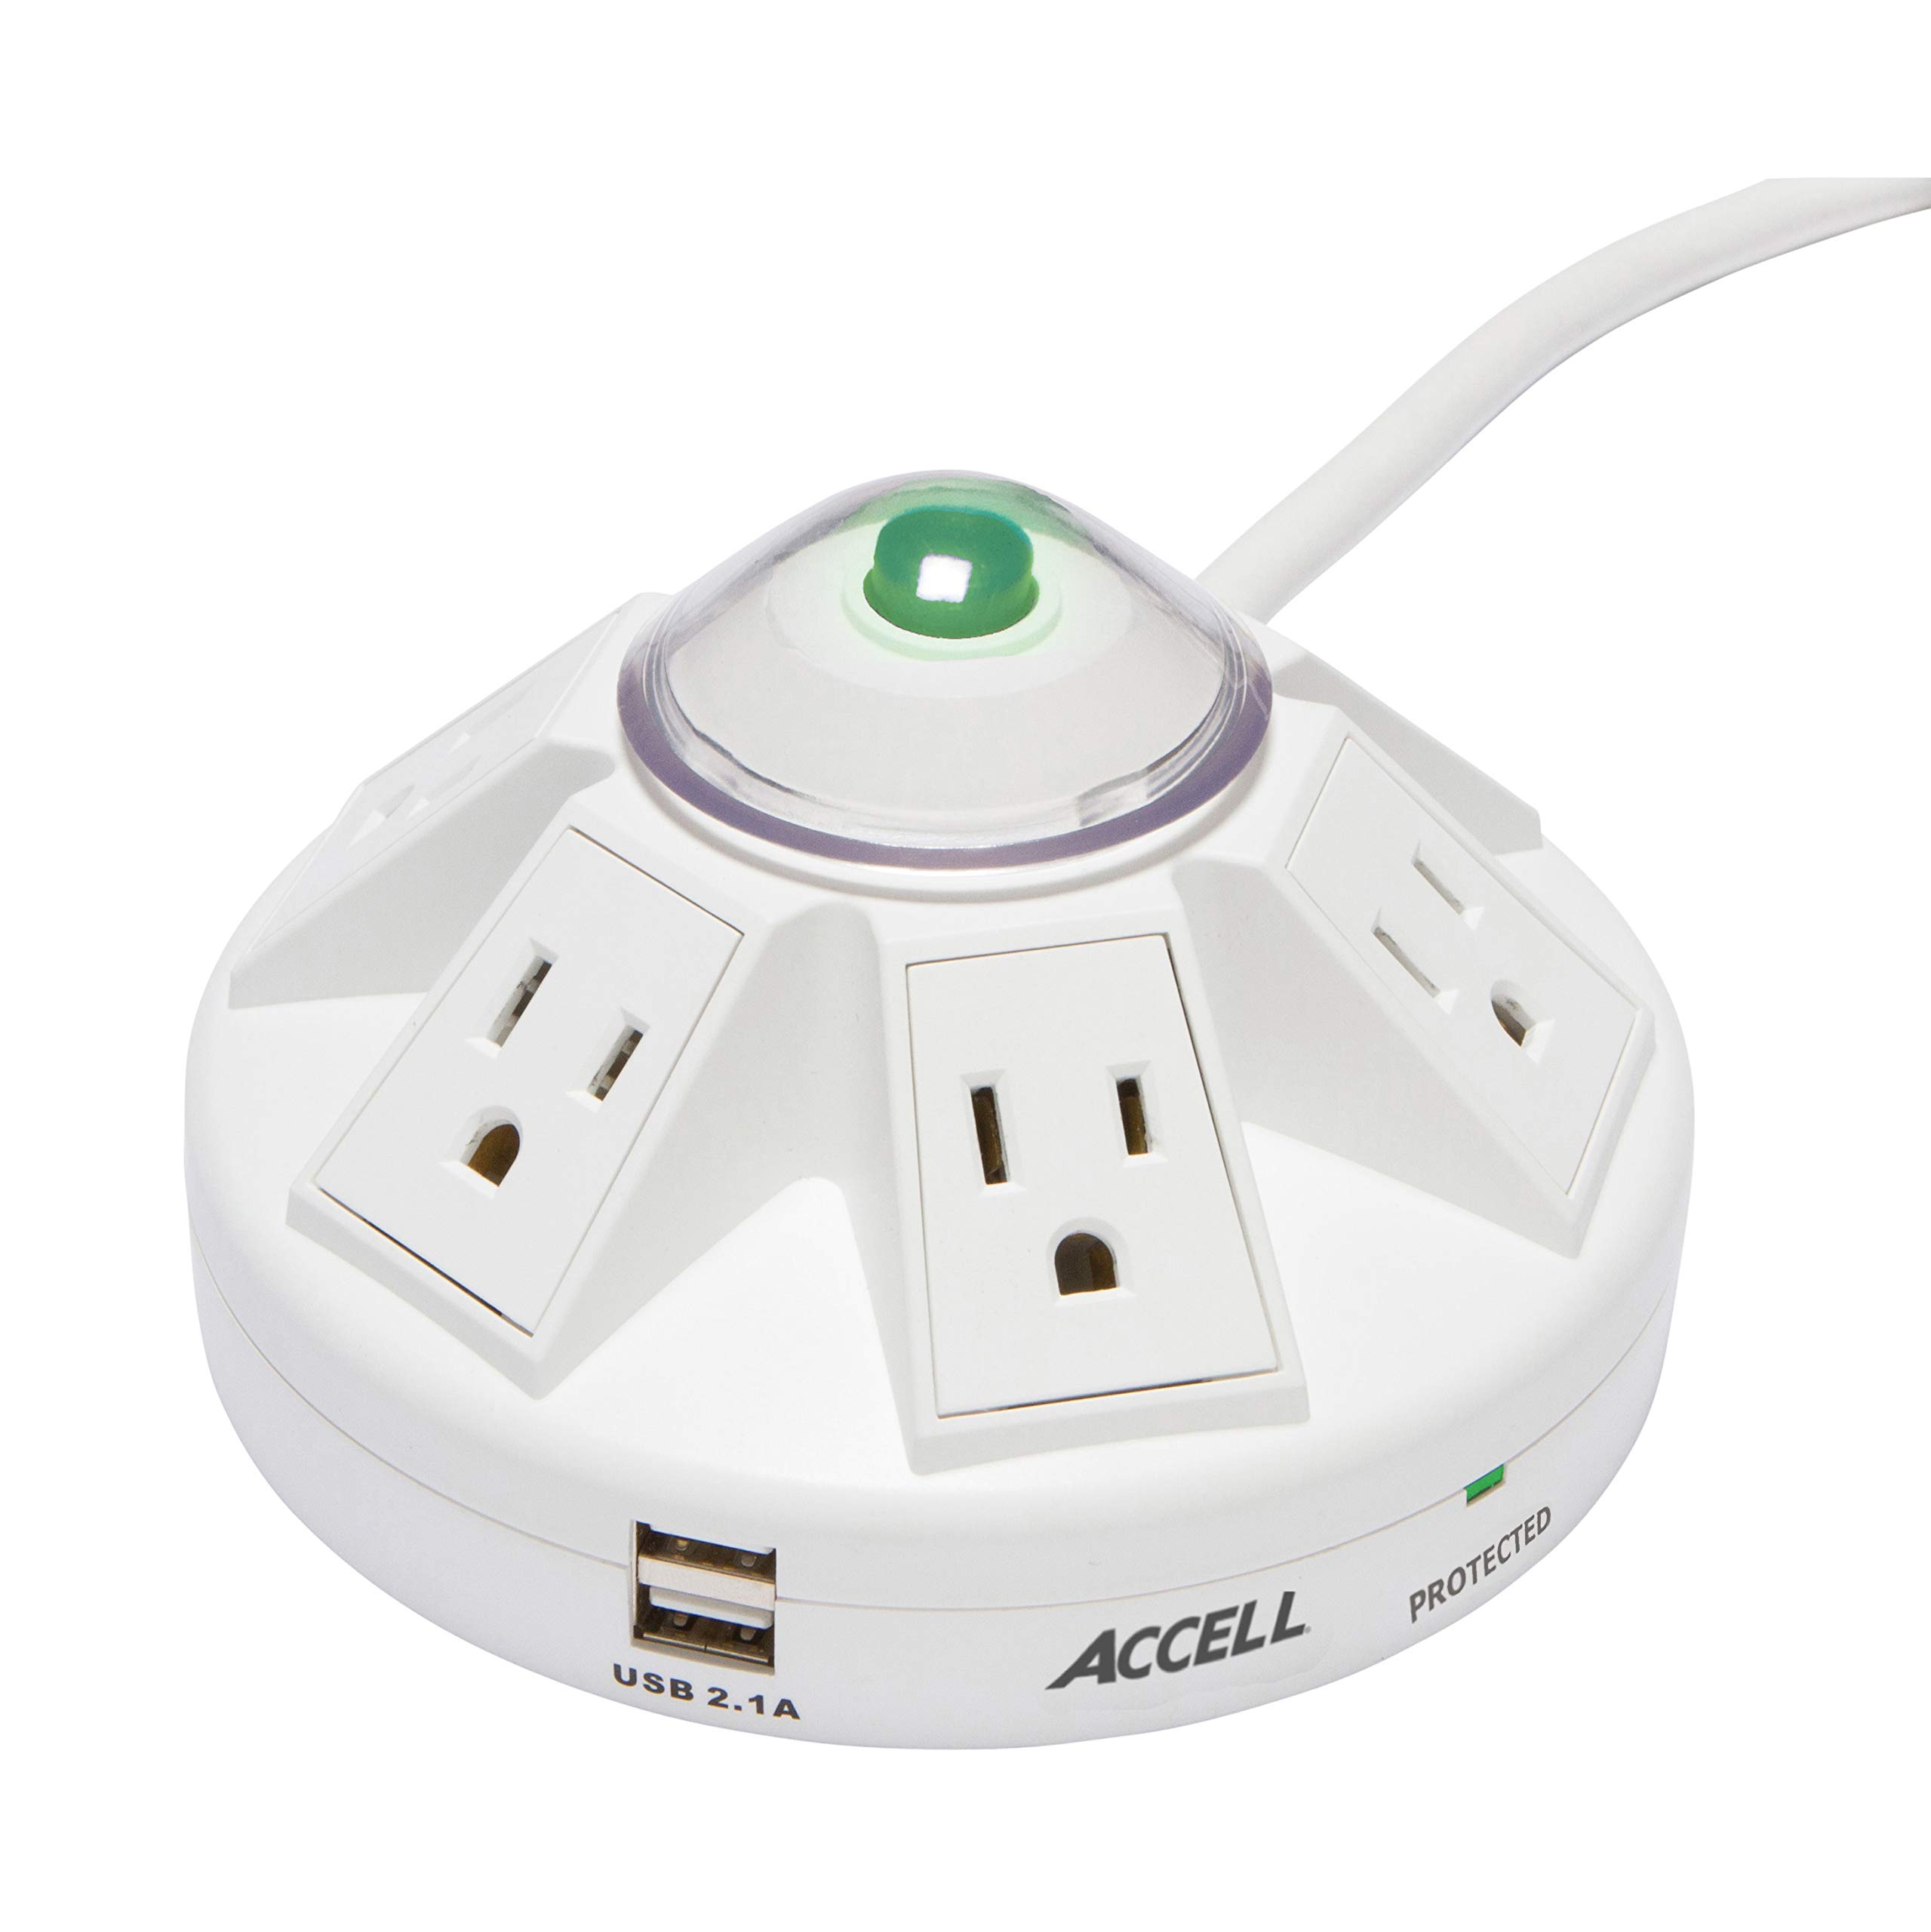 Accell Powramid USB Surge Protector - 2 USB Charging Ports (2.1A), 6 Outlets, 6-Foot Cord, 1080 Joules, UL Listed - White Grounded Extension Cord Power Strip, Model:D080B-014K